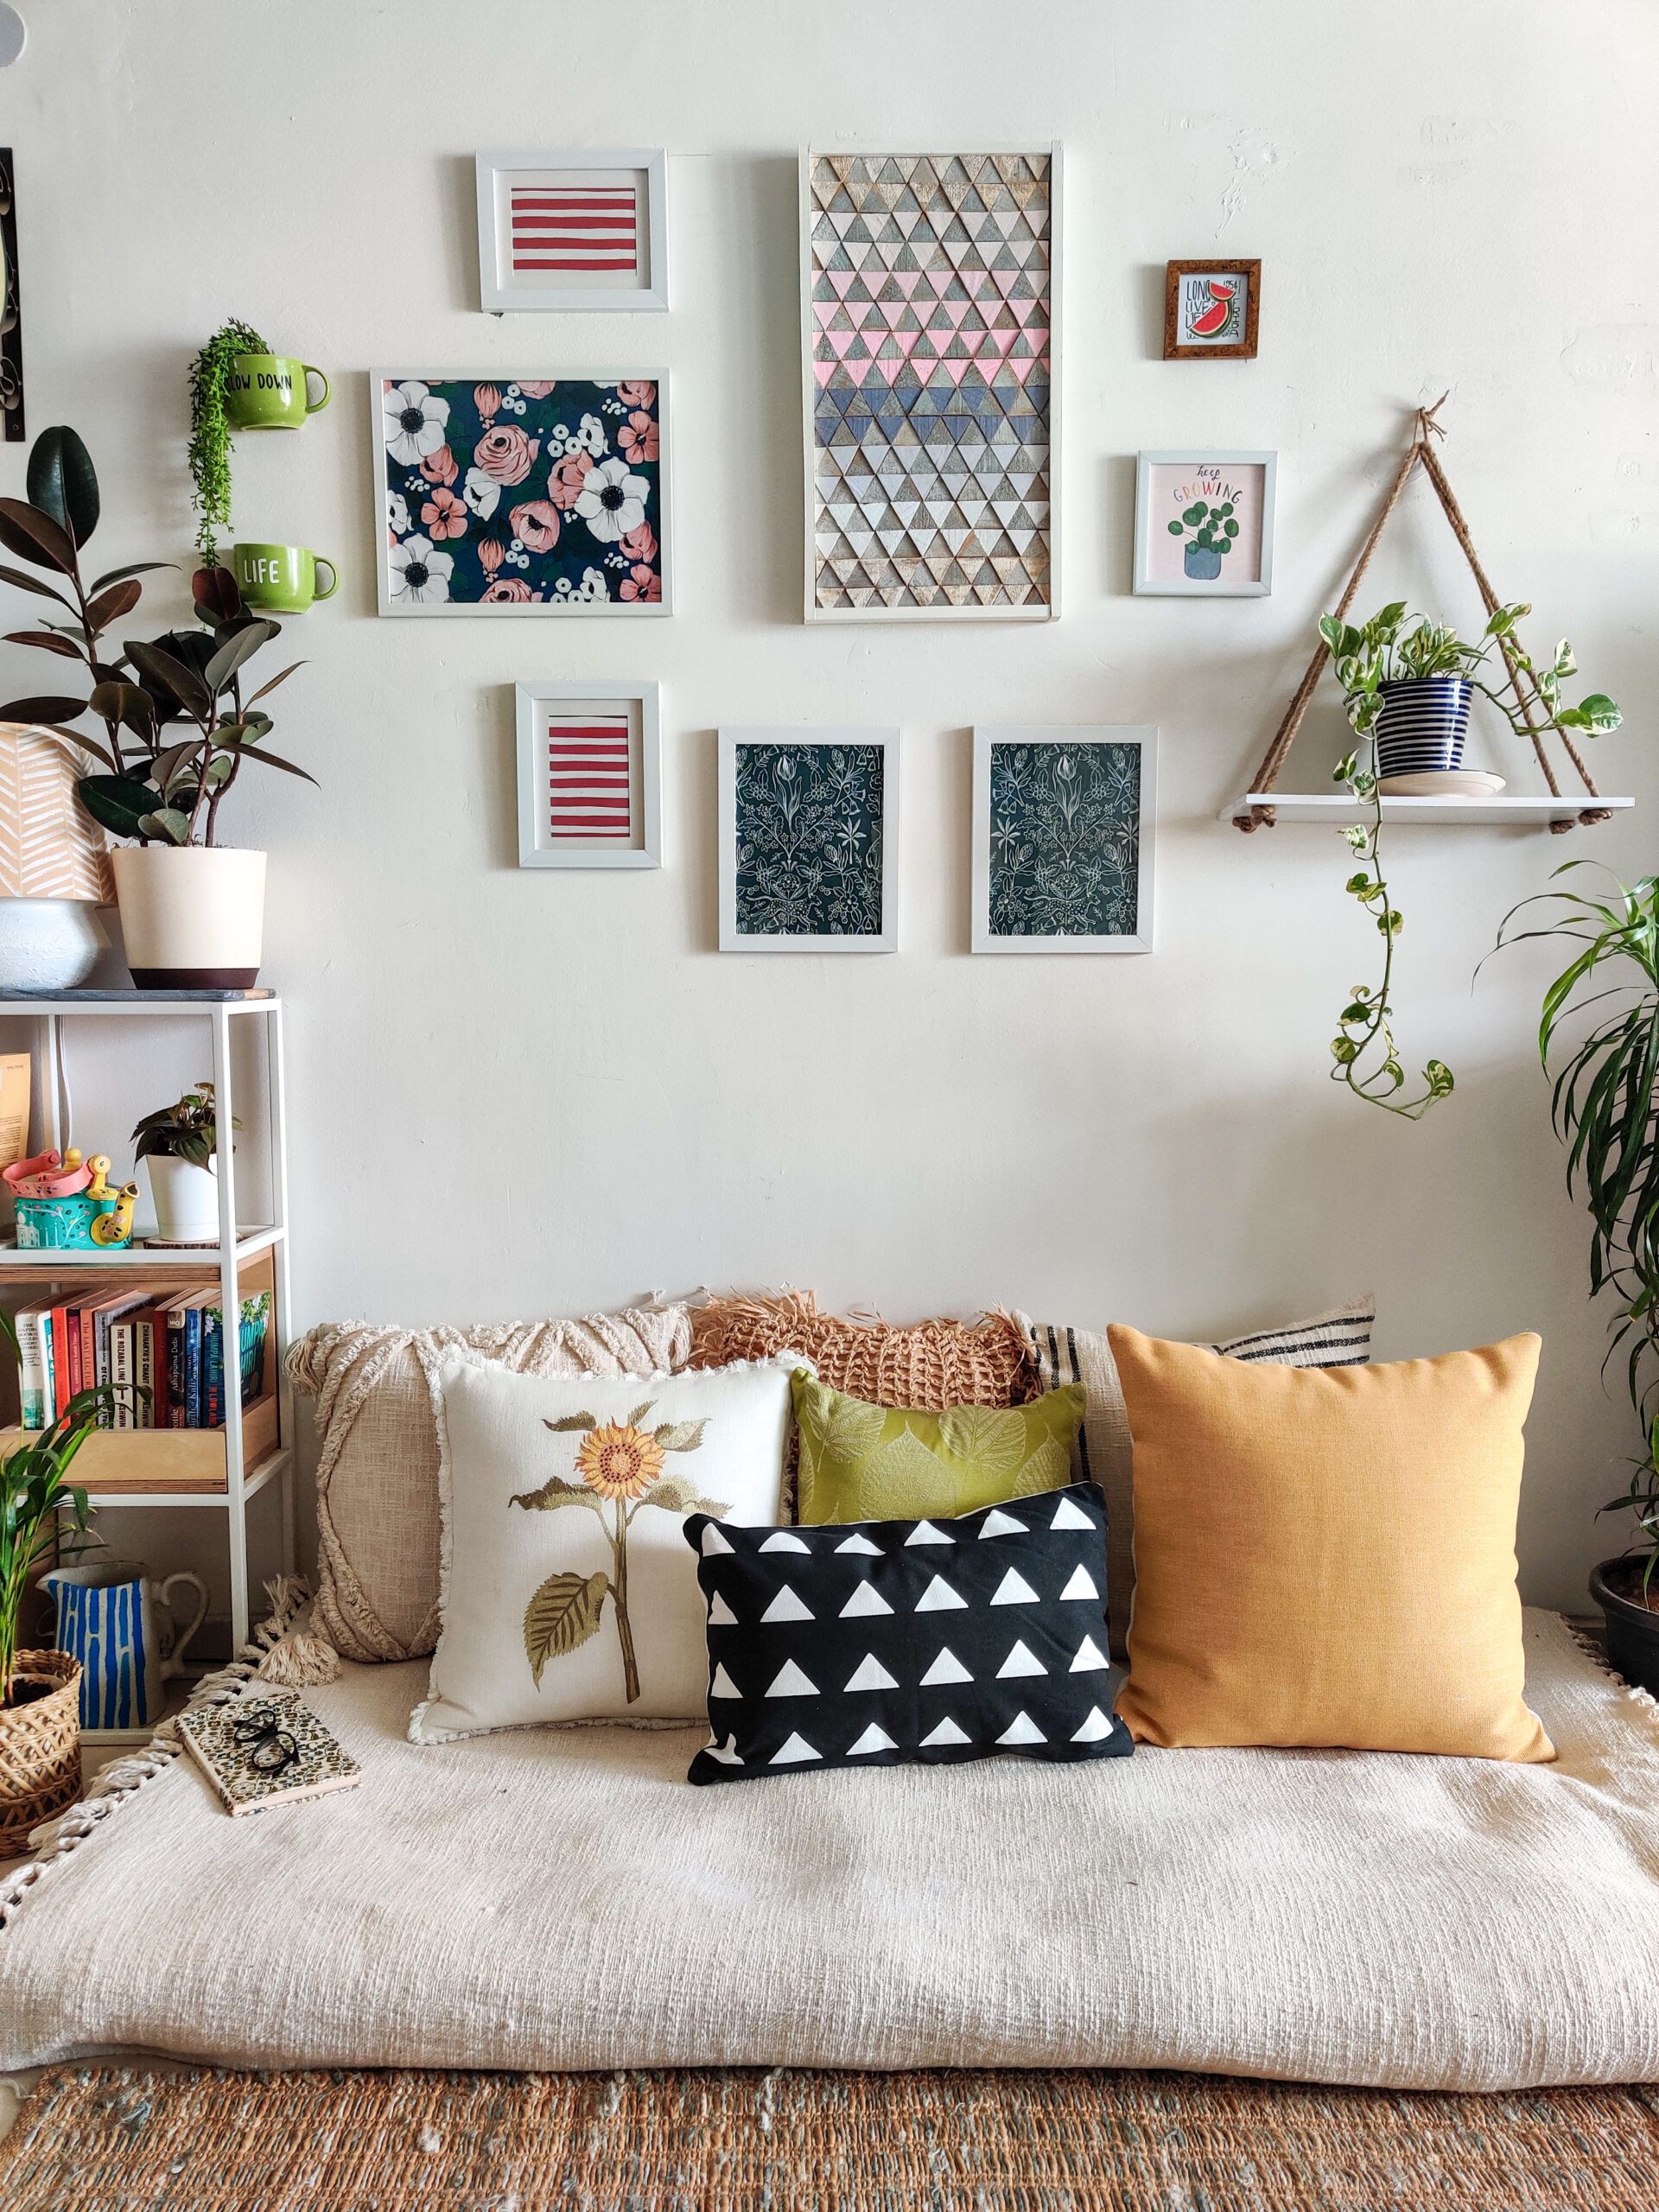 Home Decor Items You Must Own Before Age 30 - HomeLane Blog